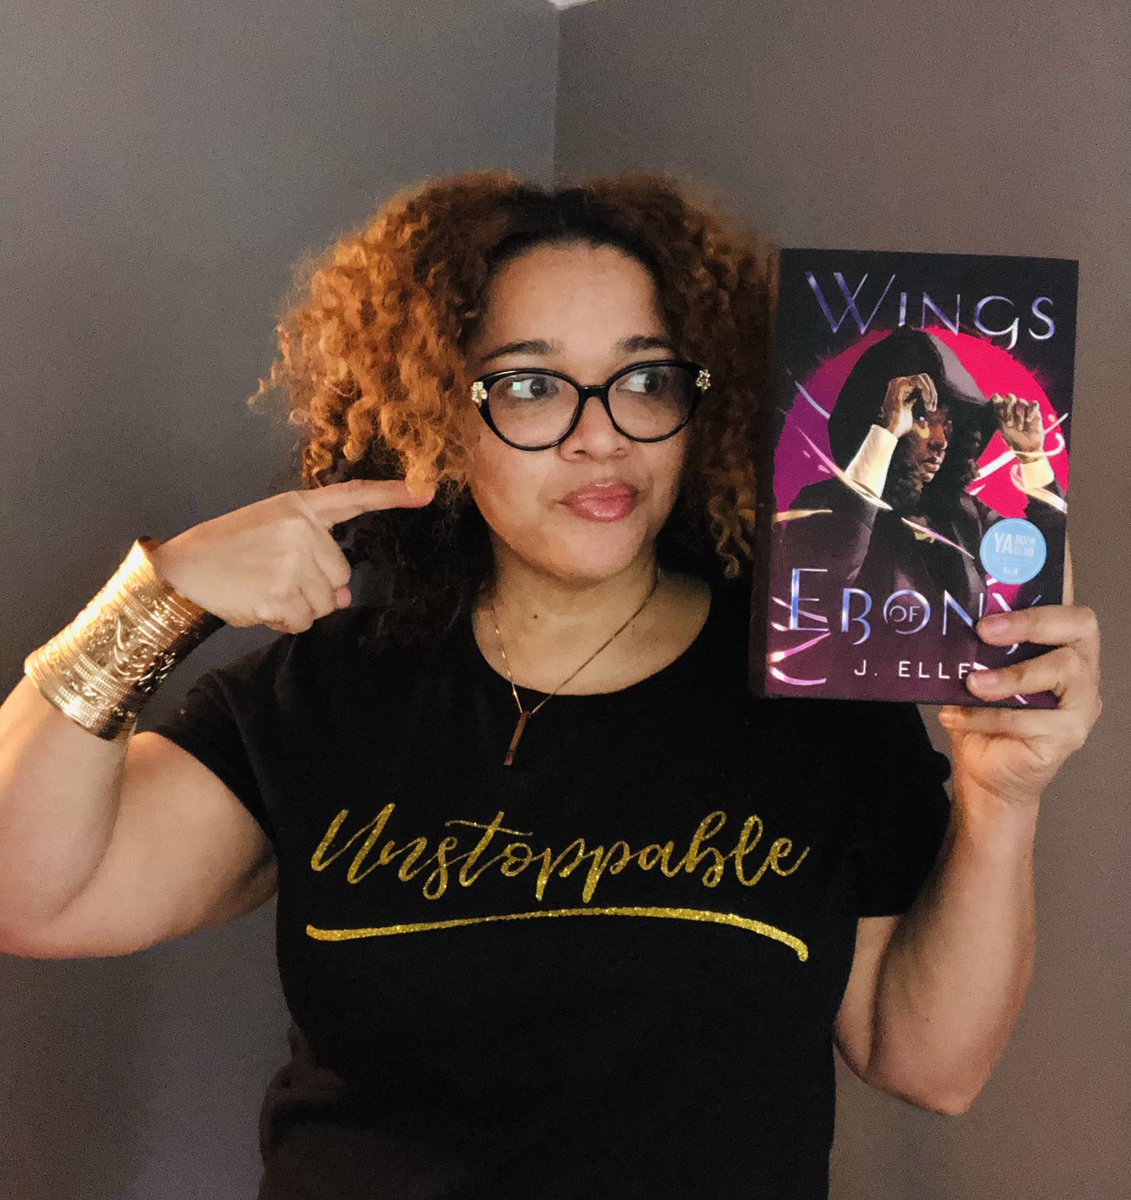 This book spoke to 15yr old a Steph living in Brick City. A story where a Black girl from the hood has magical powers. -WHAT!!

And loves her hood so much she wants to save it! —HELL Yea! 

That is #WingsofEbony in book stores NOW by @AuthorJ_Elle